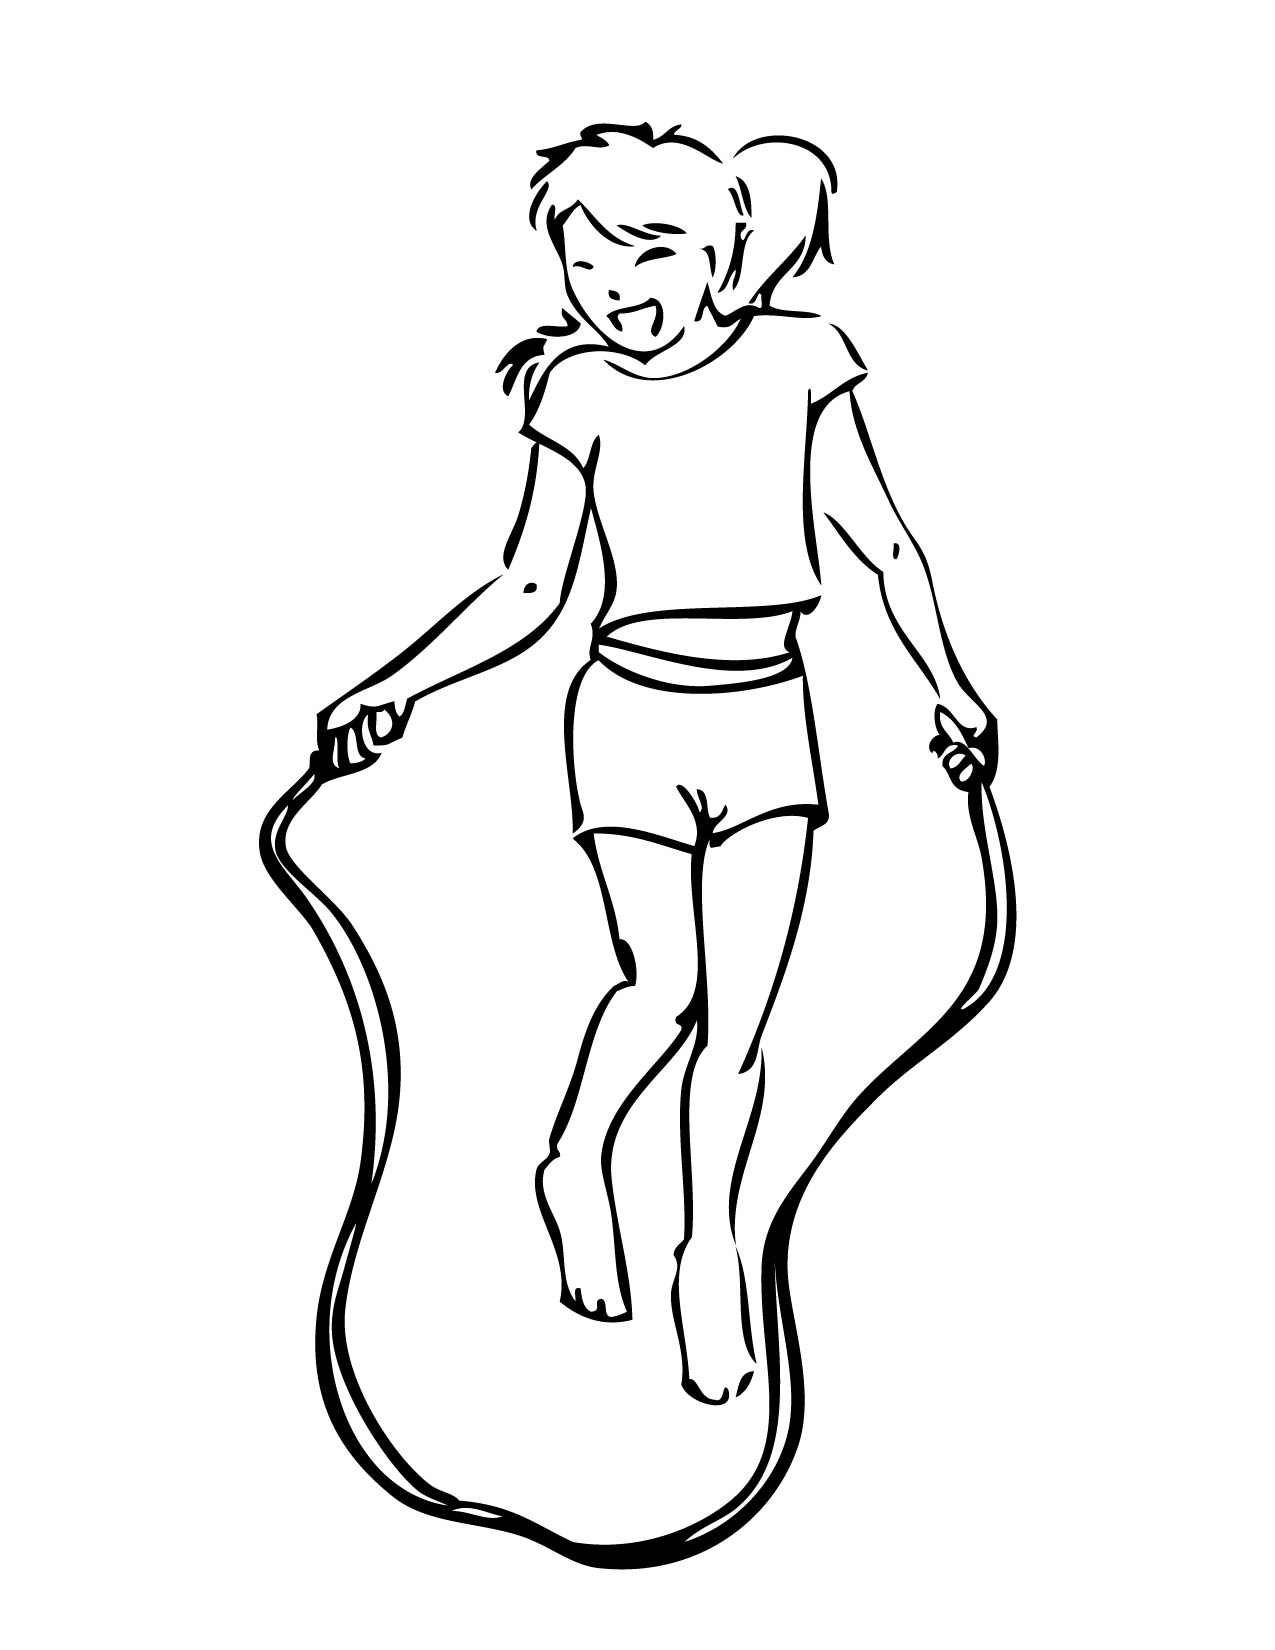 Jumprope Coloring Page - Handipoints